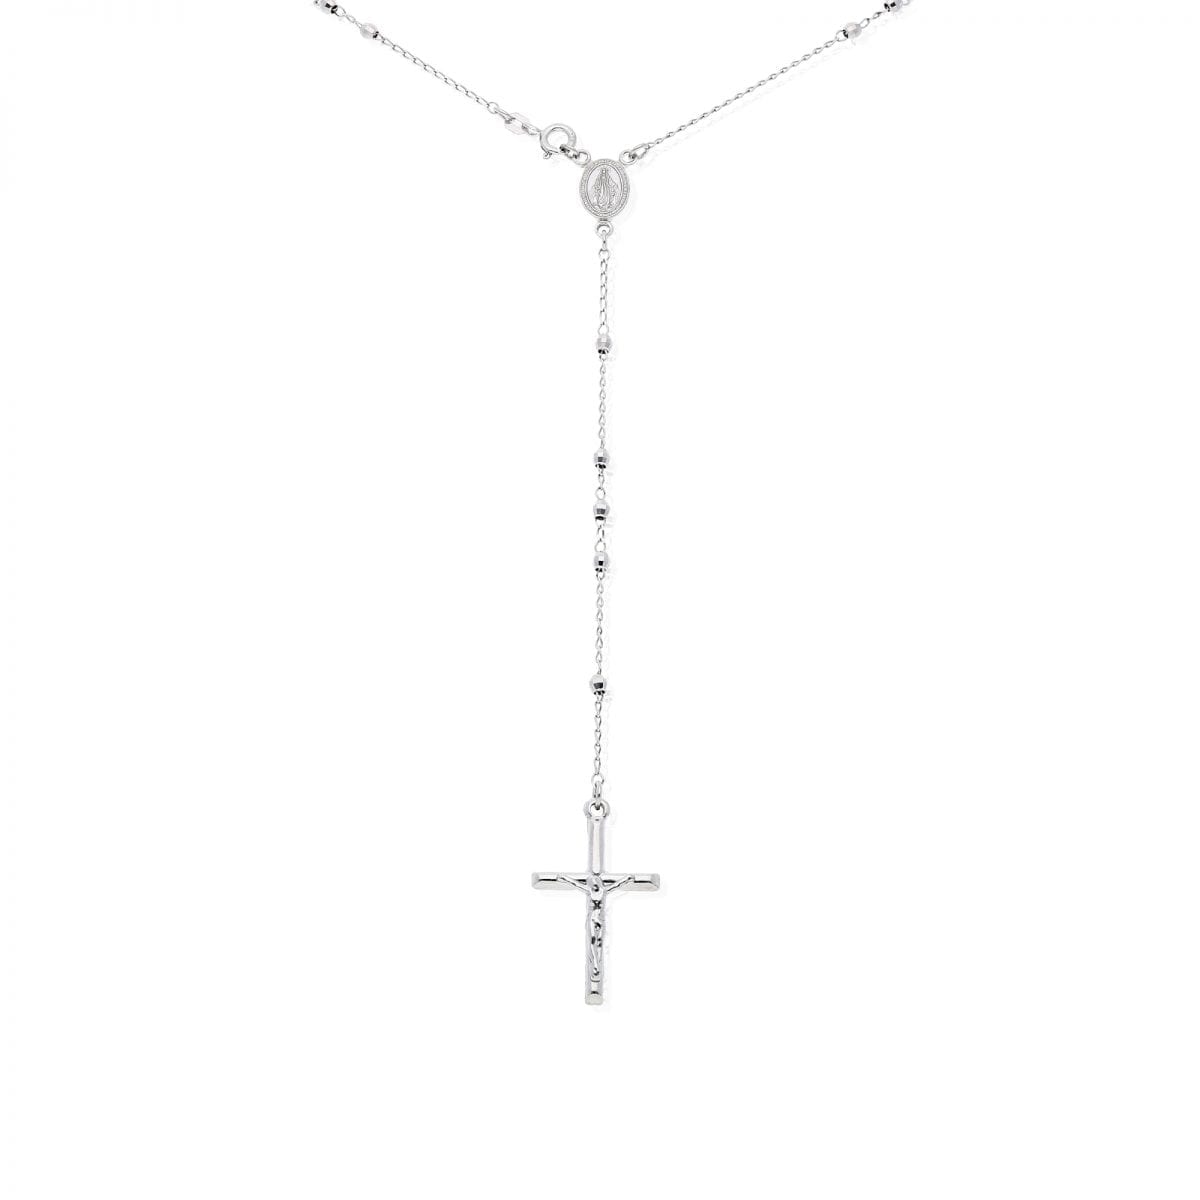 925 Sterling Silver 3mm Diamond Cut Rosary Cross Chain Necklace 24"